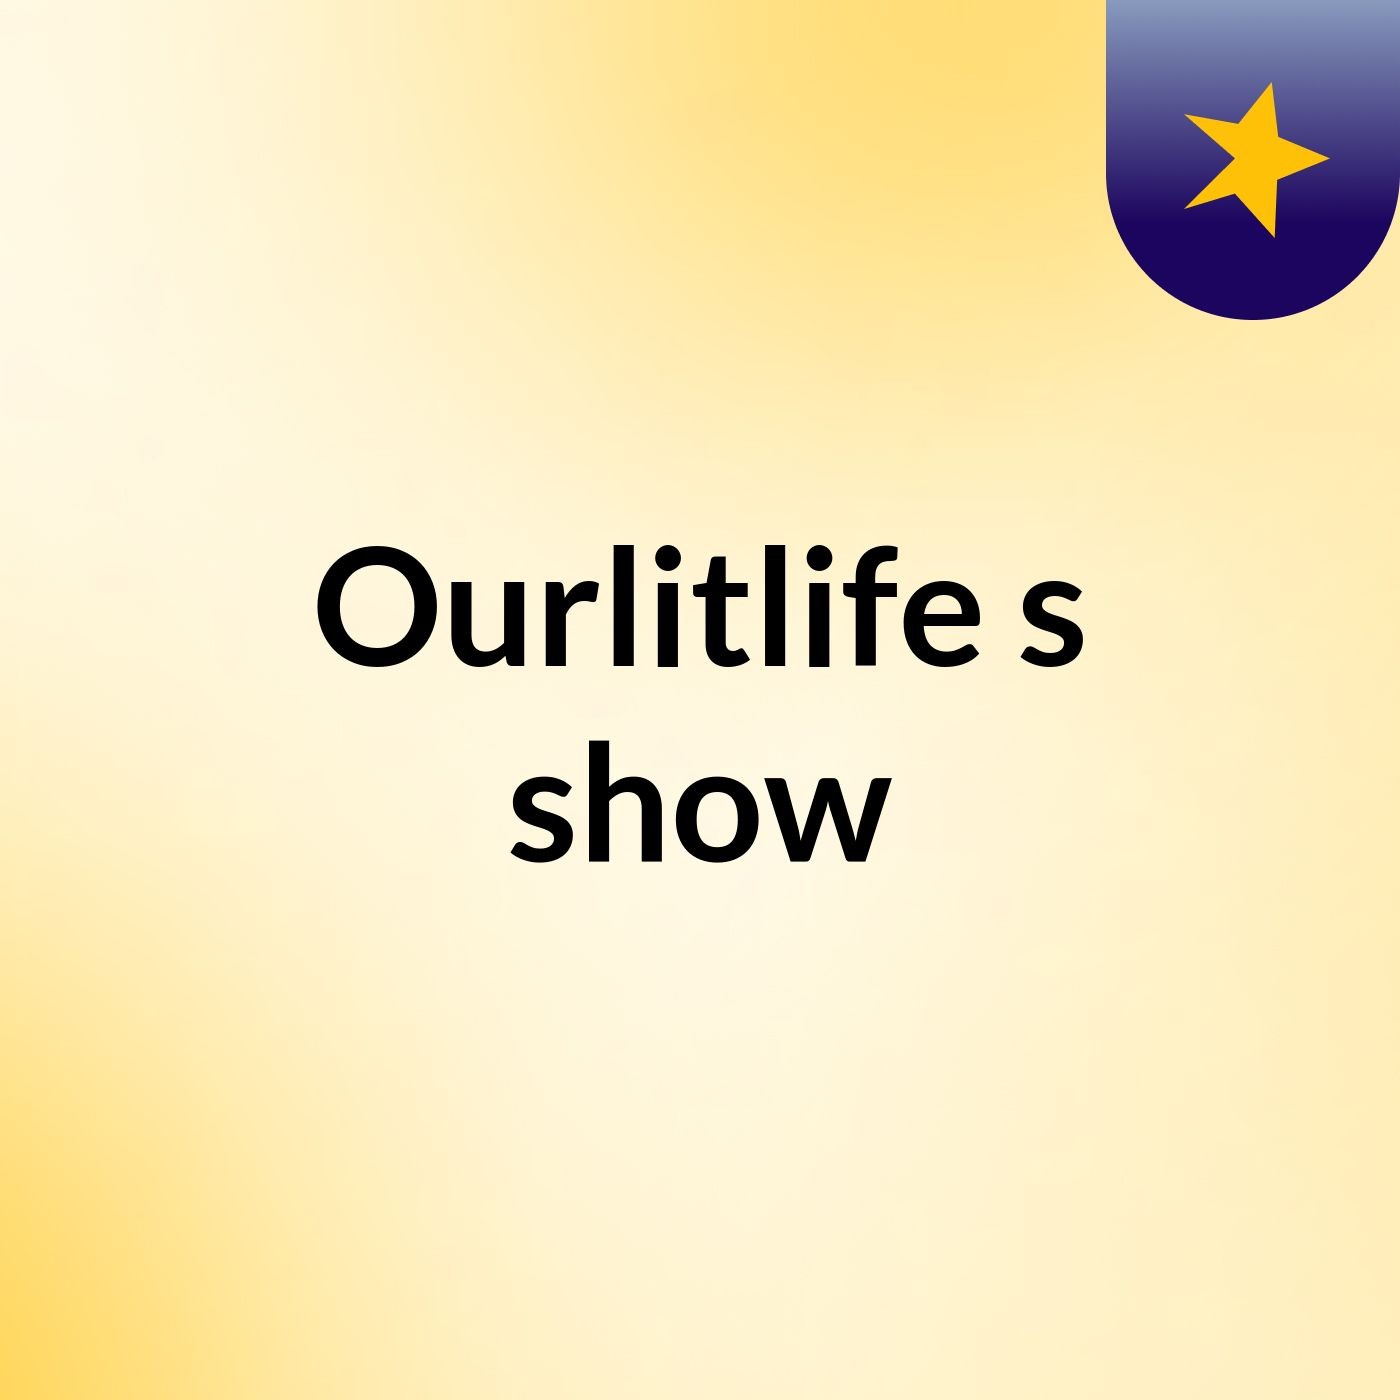 Ourlitlife's show